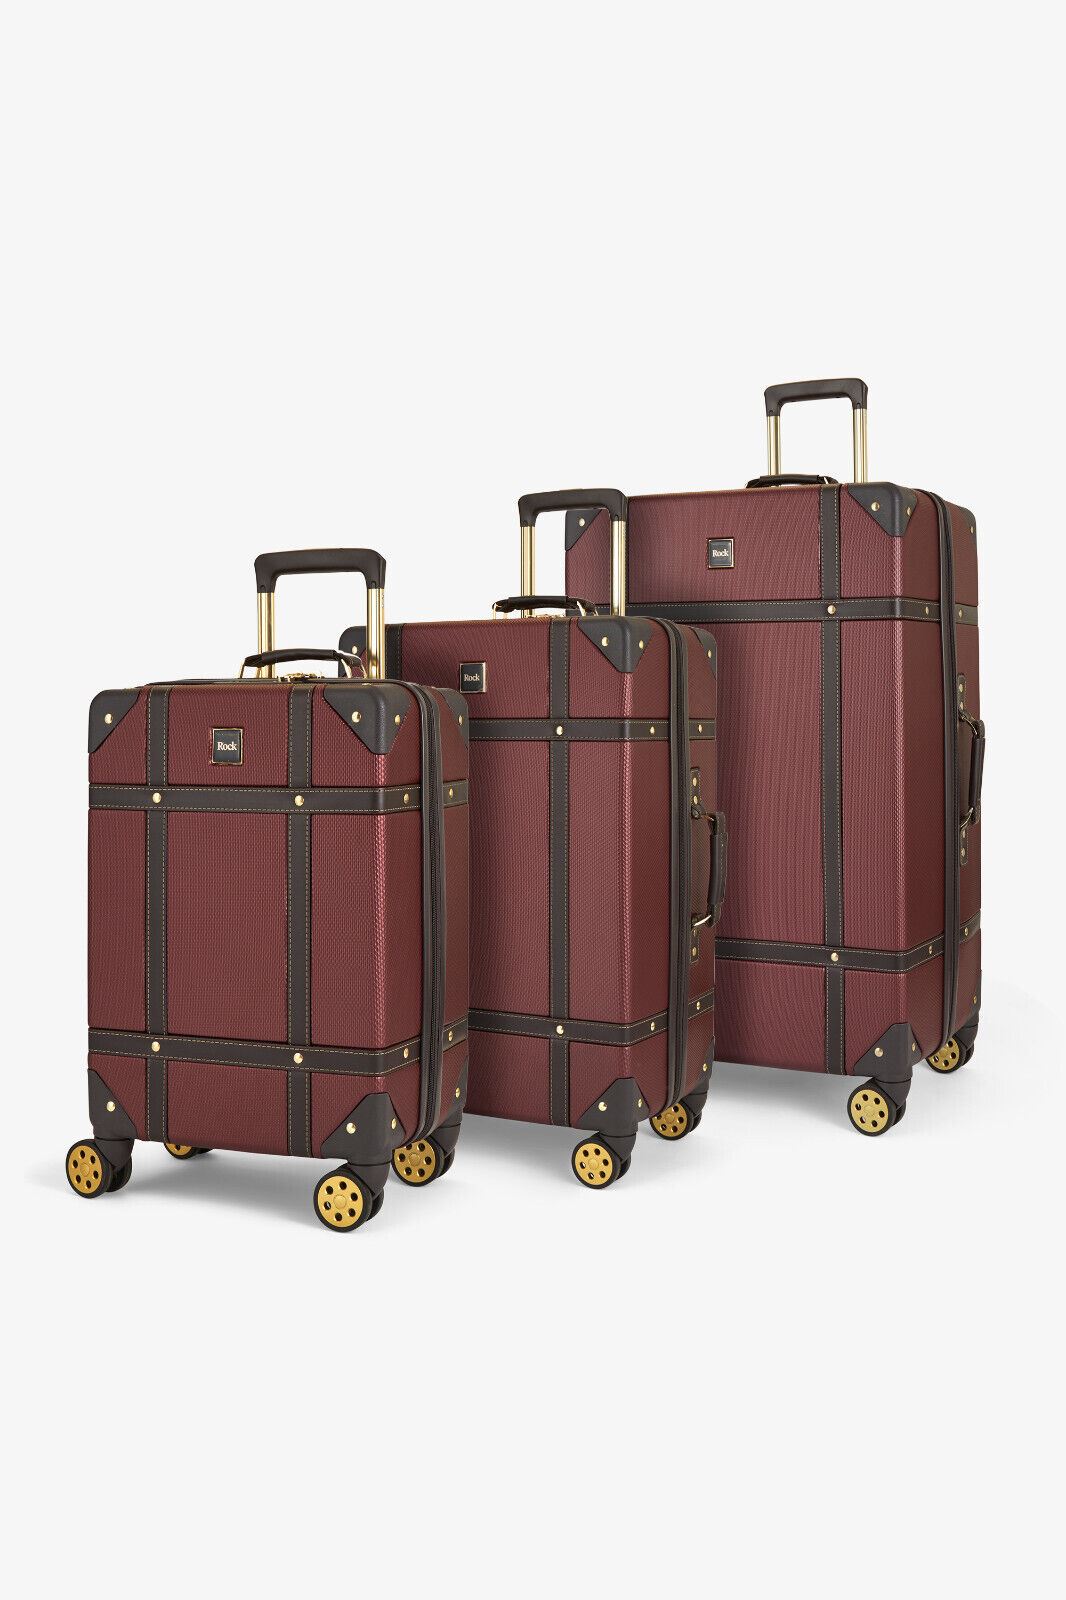 Hard Shell Burgundy Luggage Suitcase Set Trunk Cabin Travel Bags